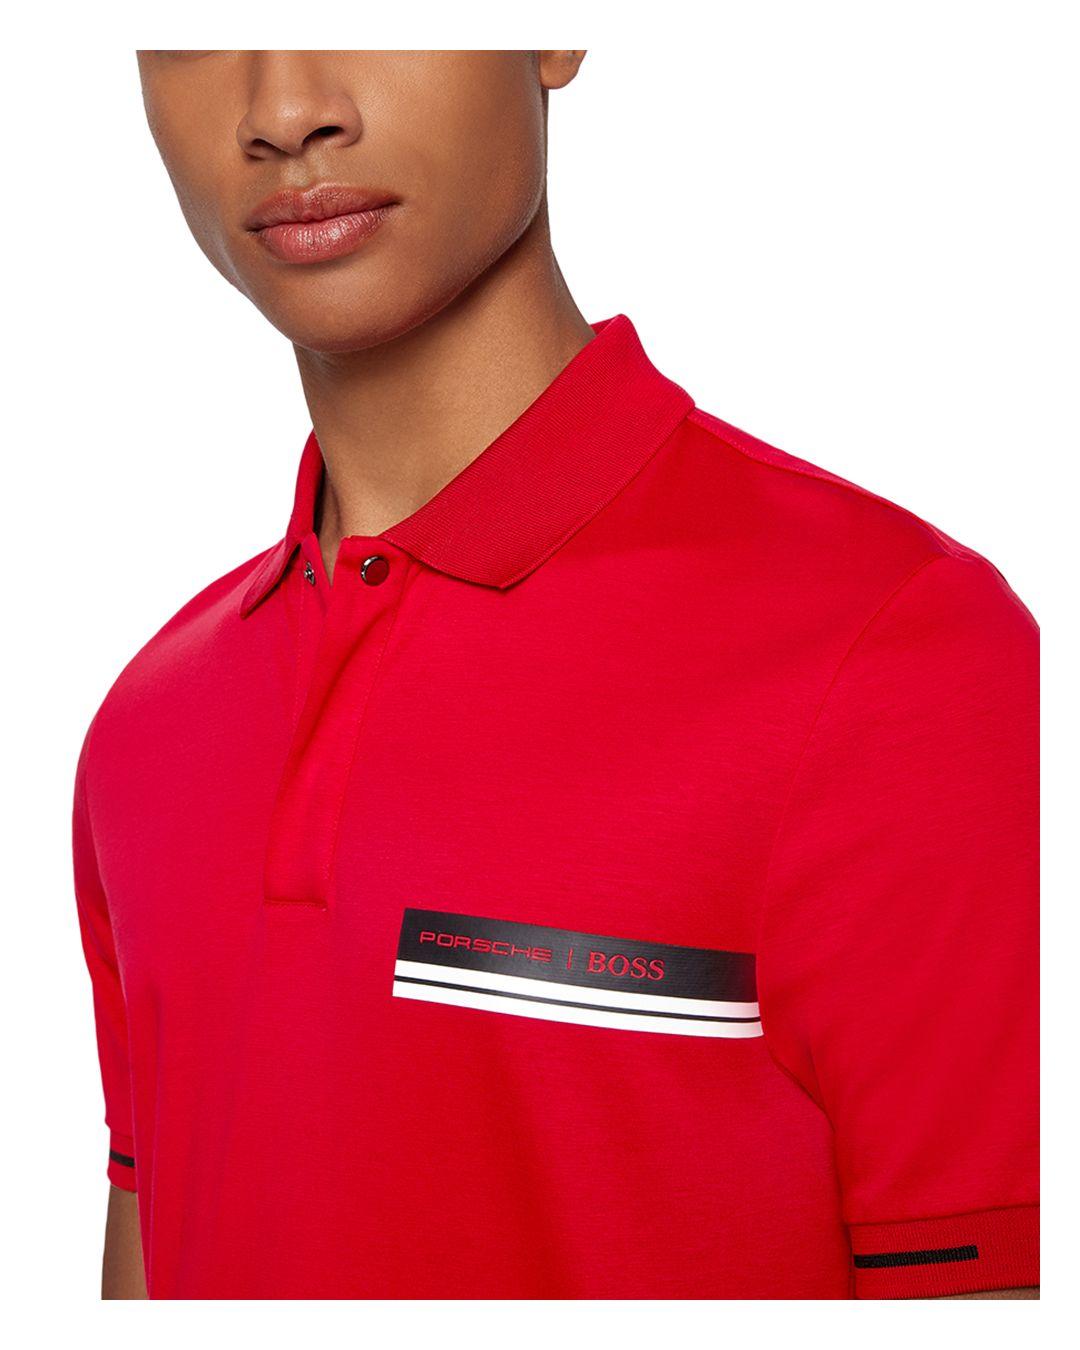 BOSS by HUGO BOSS Slim Fit Porsche Polo in Red for Men | Lyst Canada